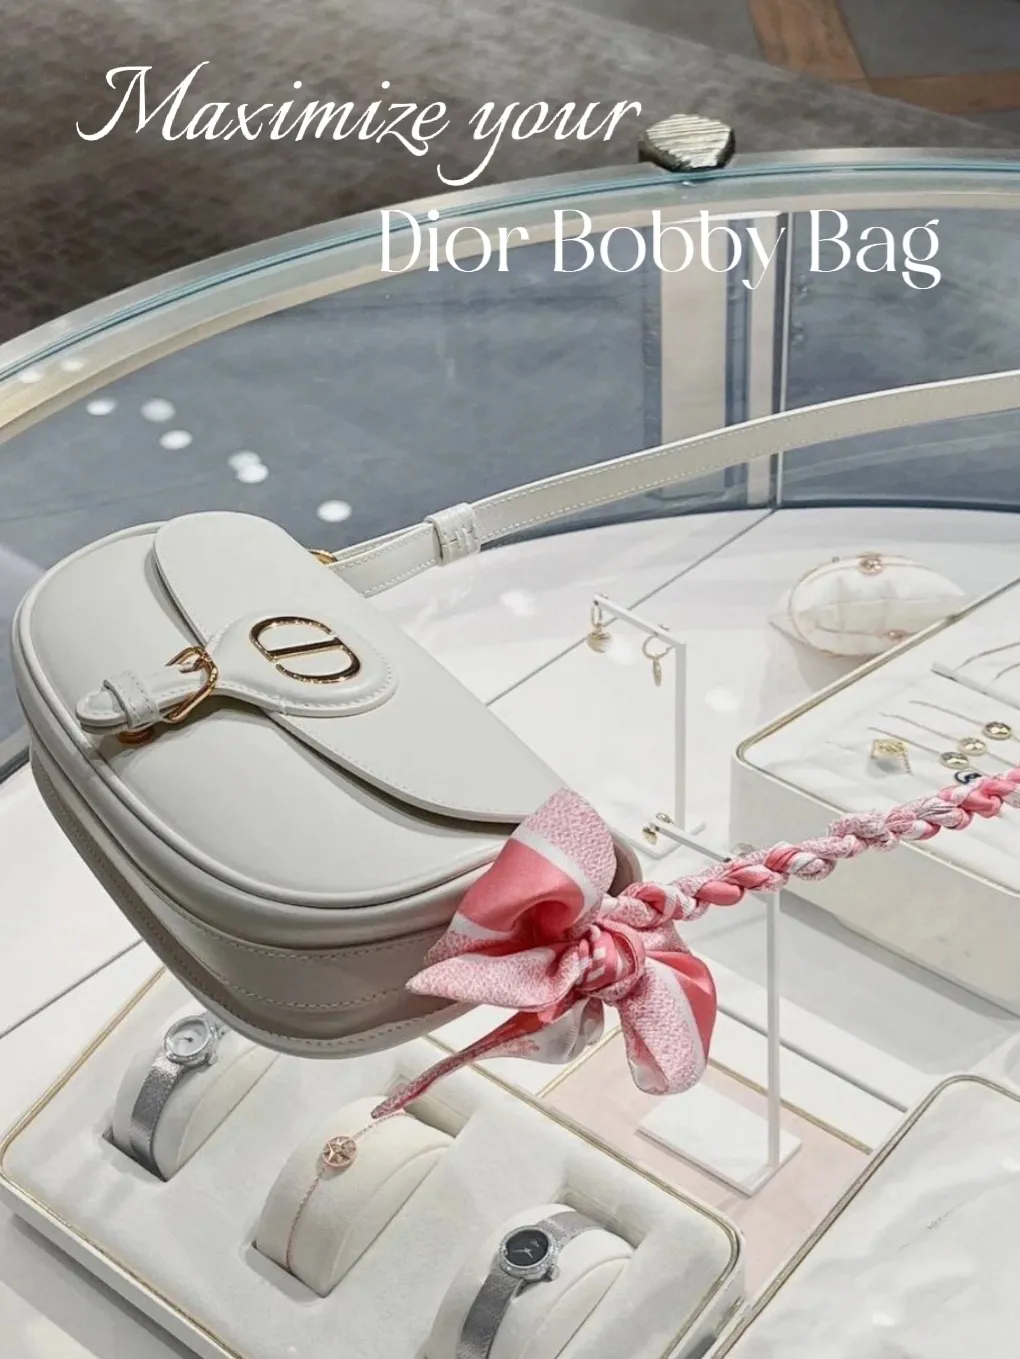 Trying to decide between Dior Saddle and the Dior Bobby to add to my  collection while I'm in Paris (there's a significant price savings compared  to buying in the US) Thoughts? 